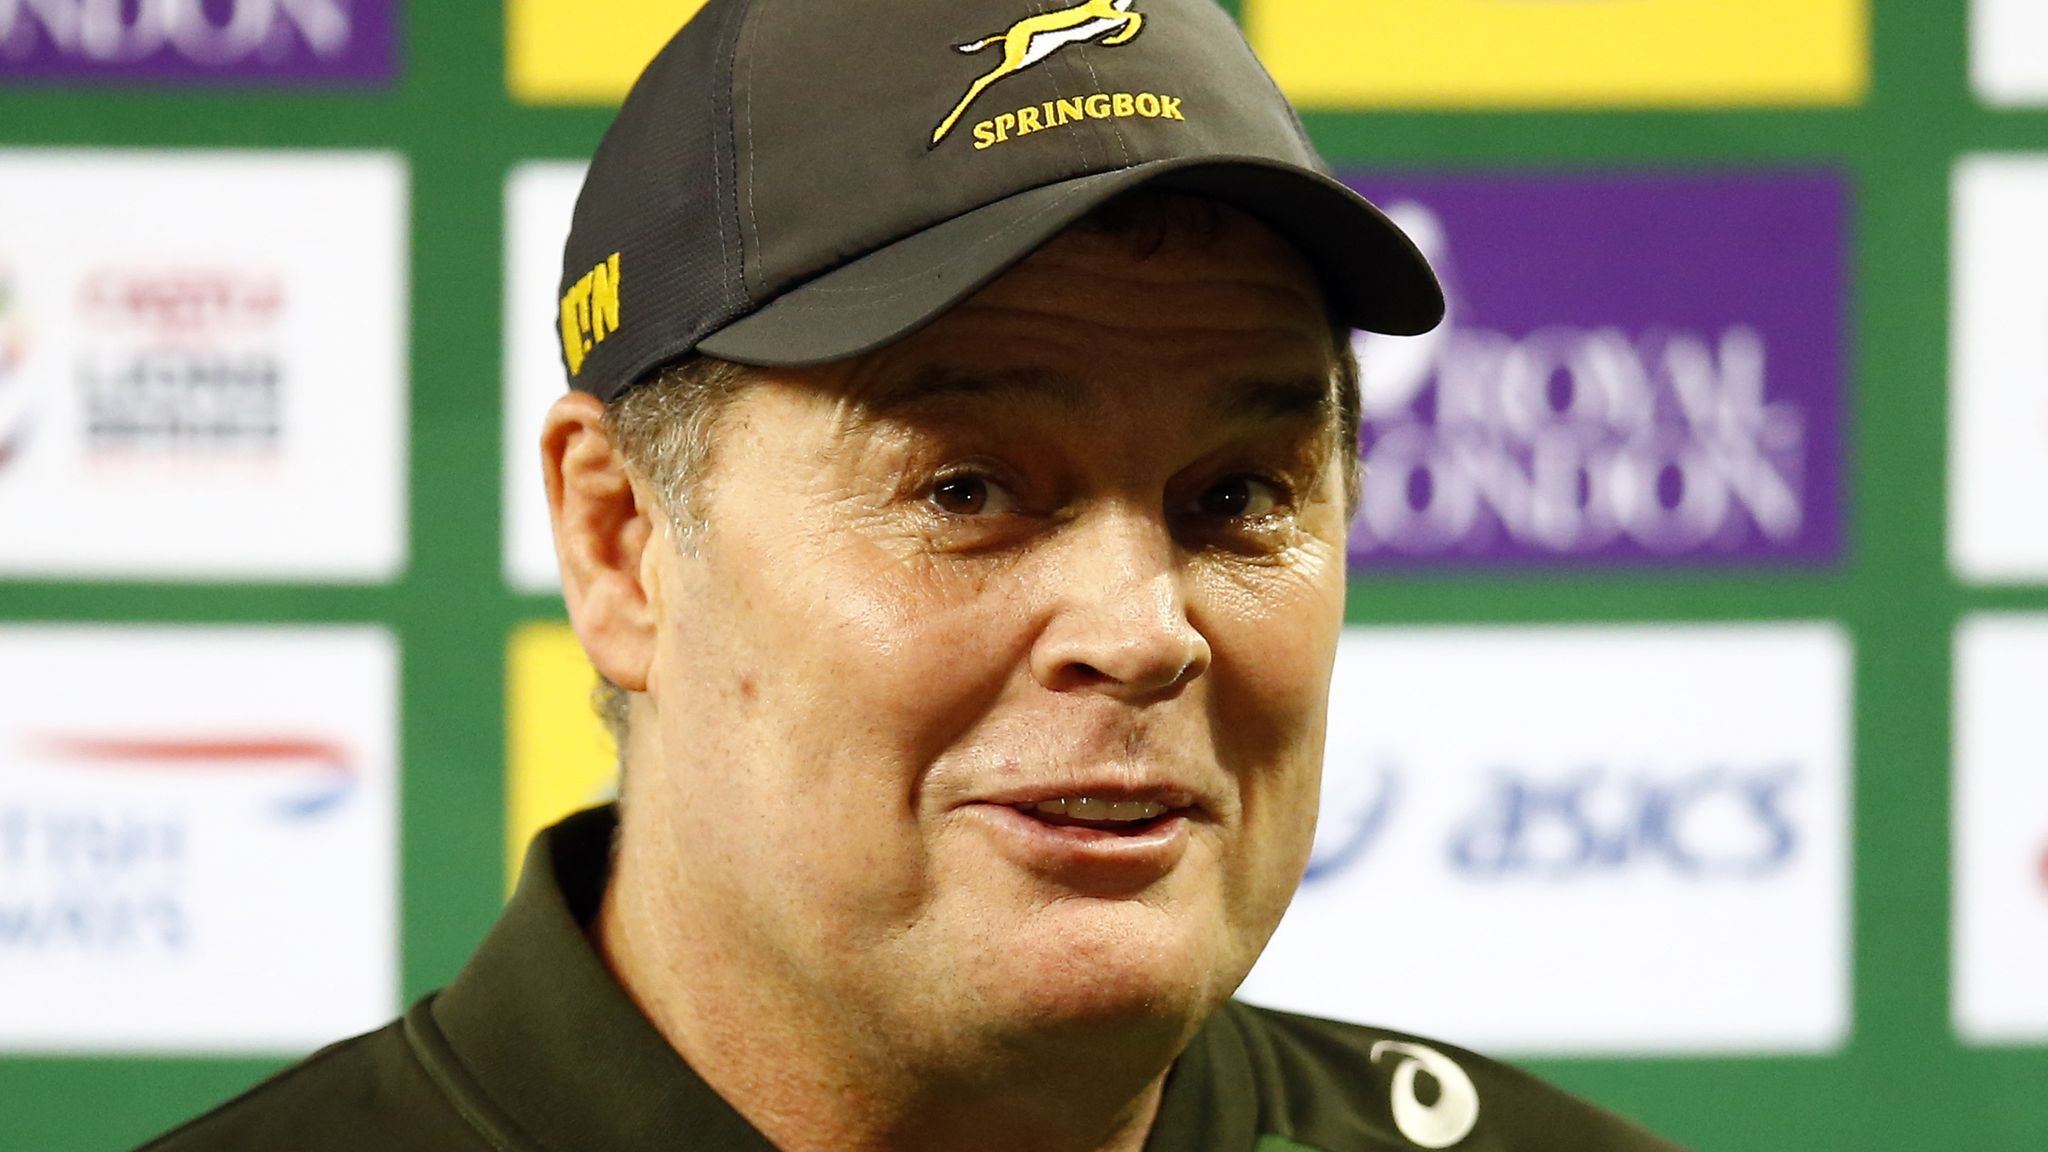 British And Irish Lions South Africa S Rassie Erasmus Questions Owen Farrell Tackles In Call For Clarity Rugby Union News Sky Sports